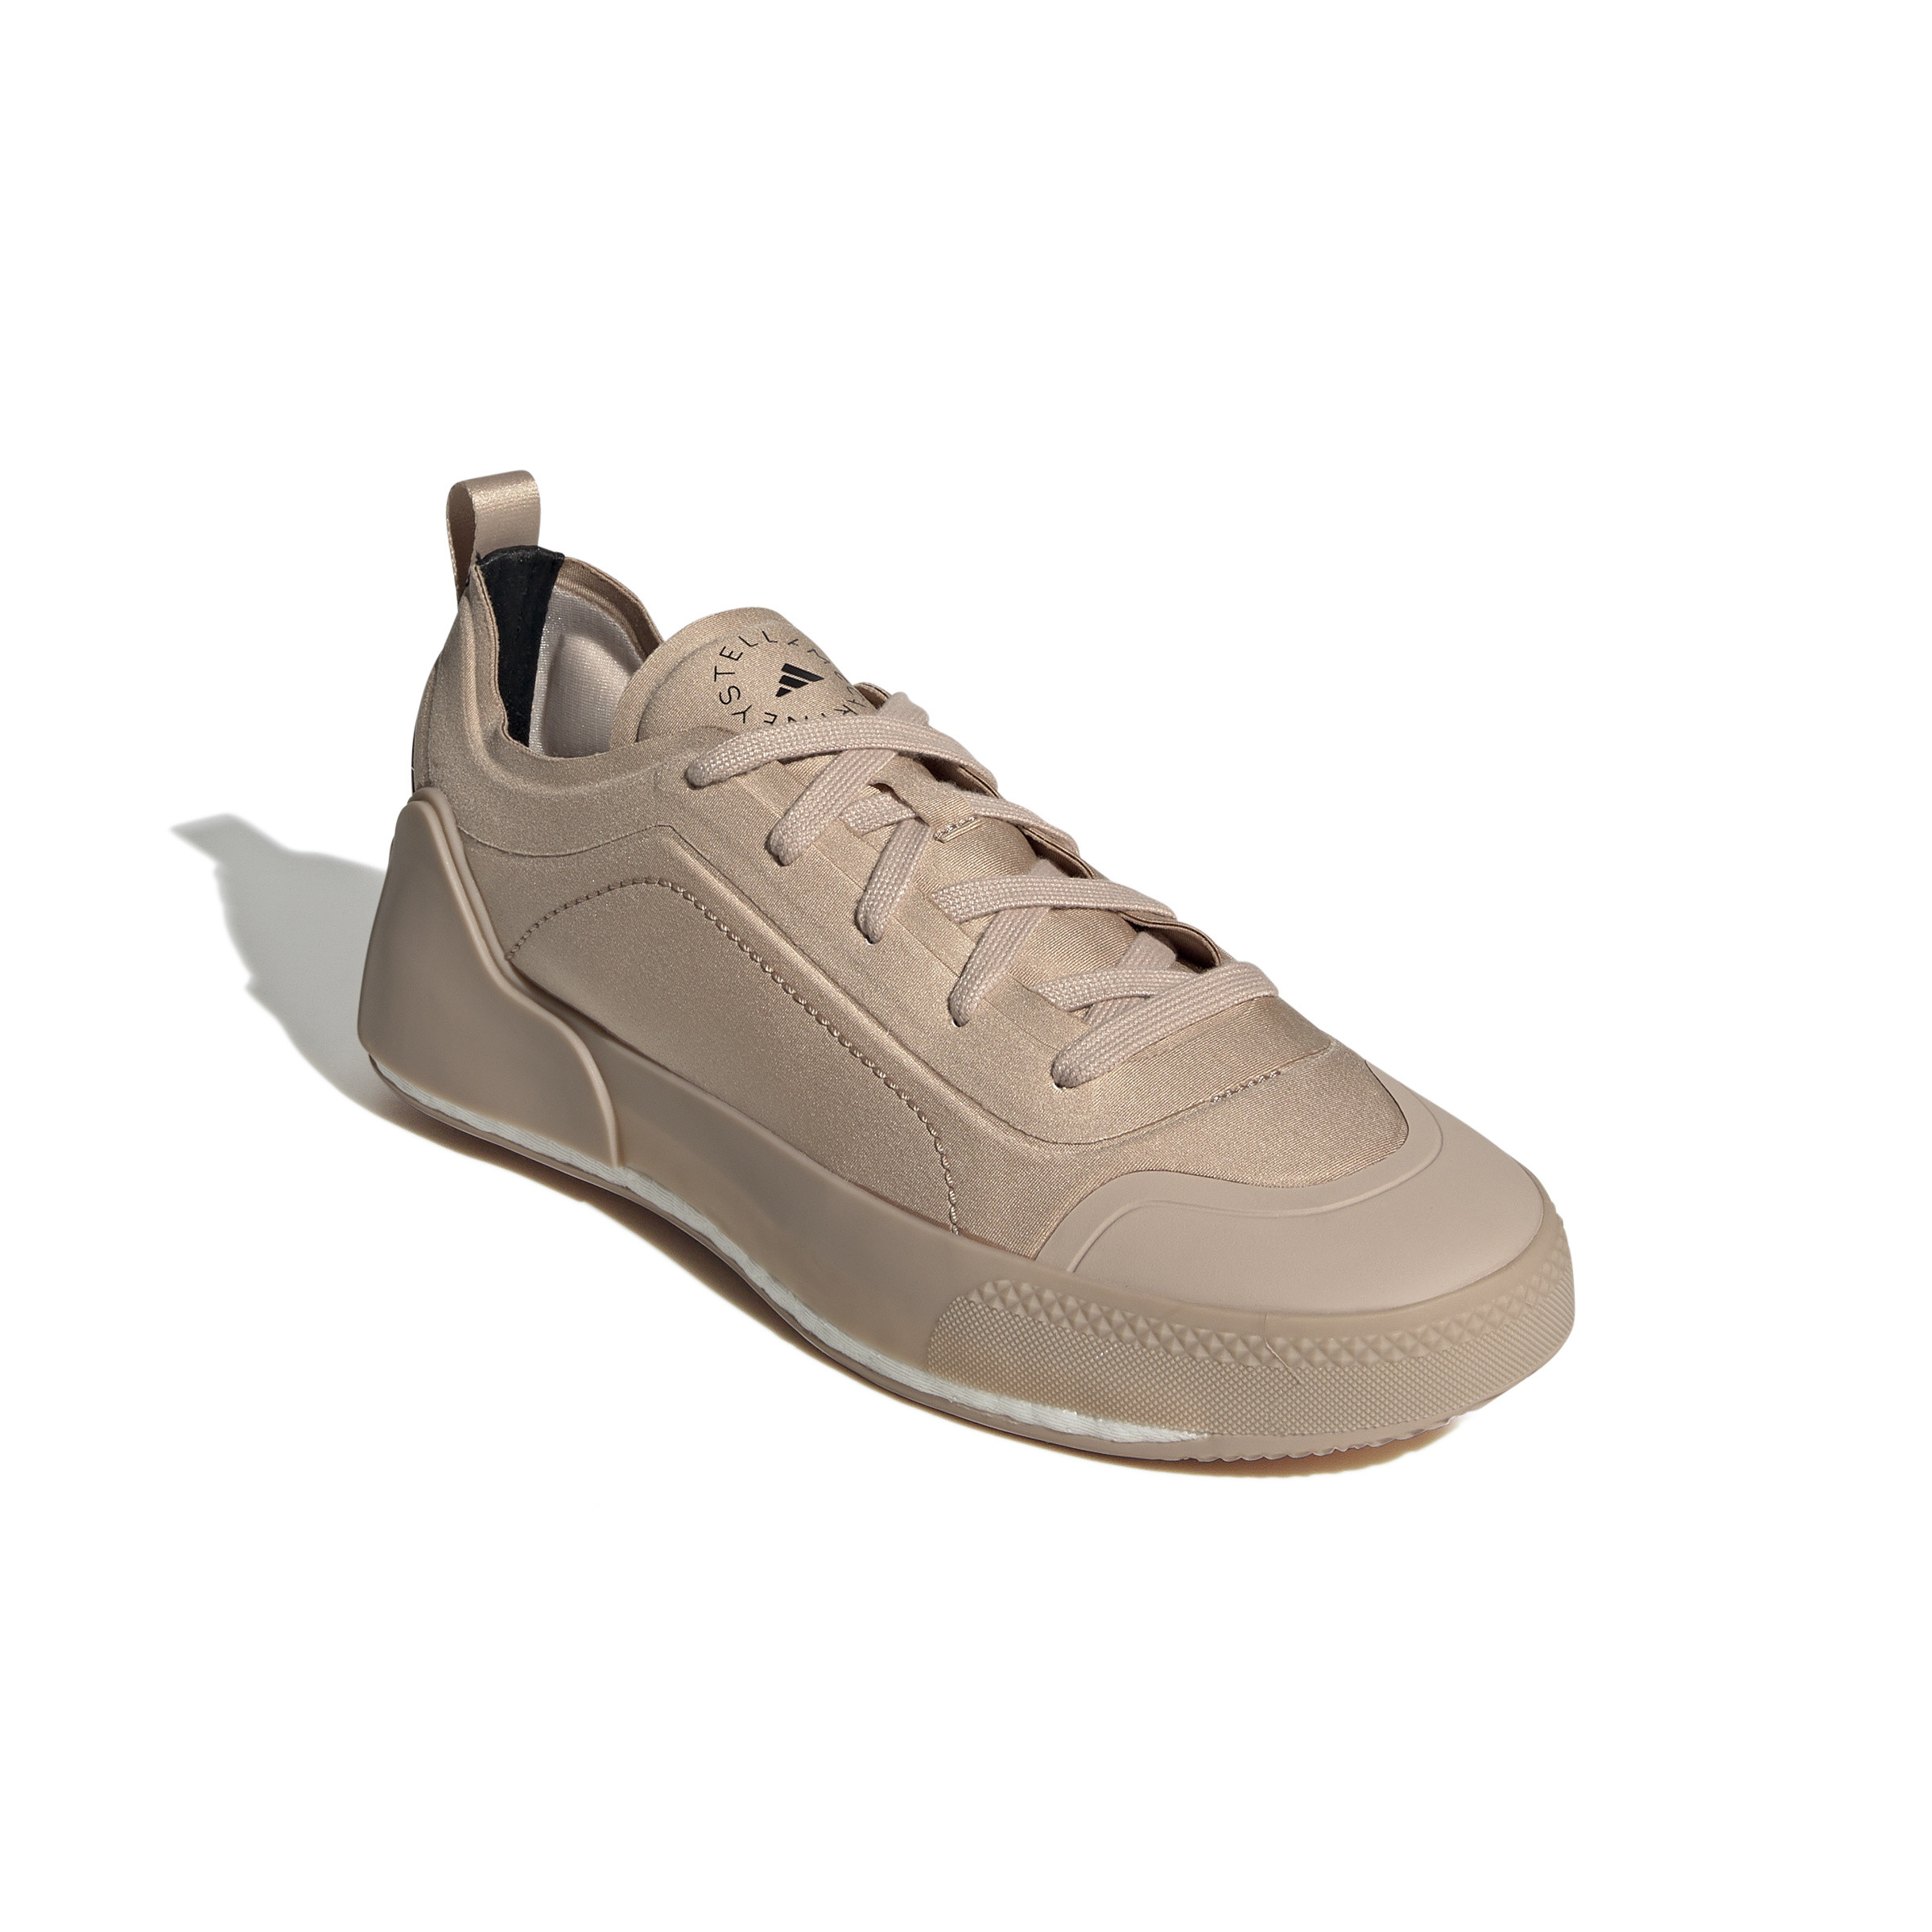 Adidas by Stella Mccartney Treino shoes - Coin.it | Coin Ecom